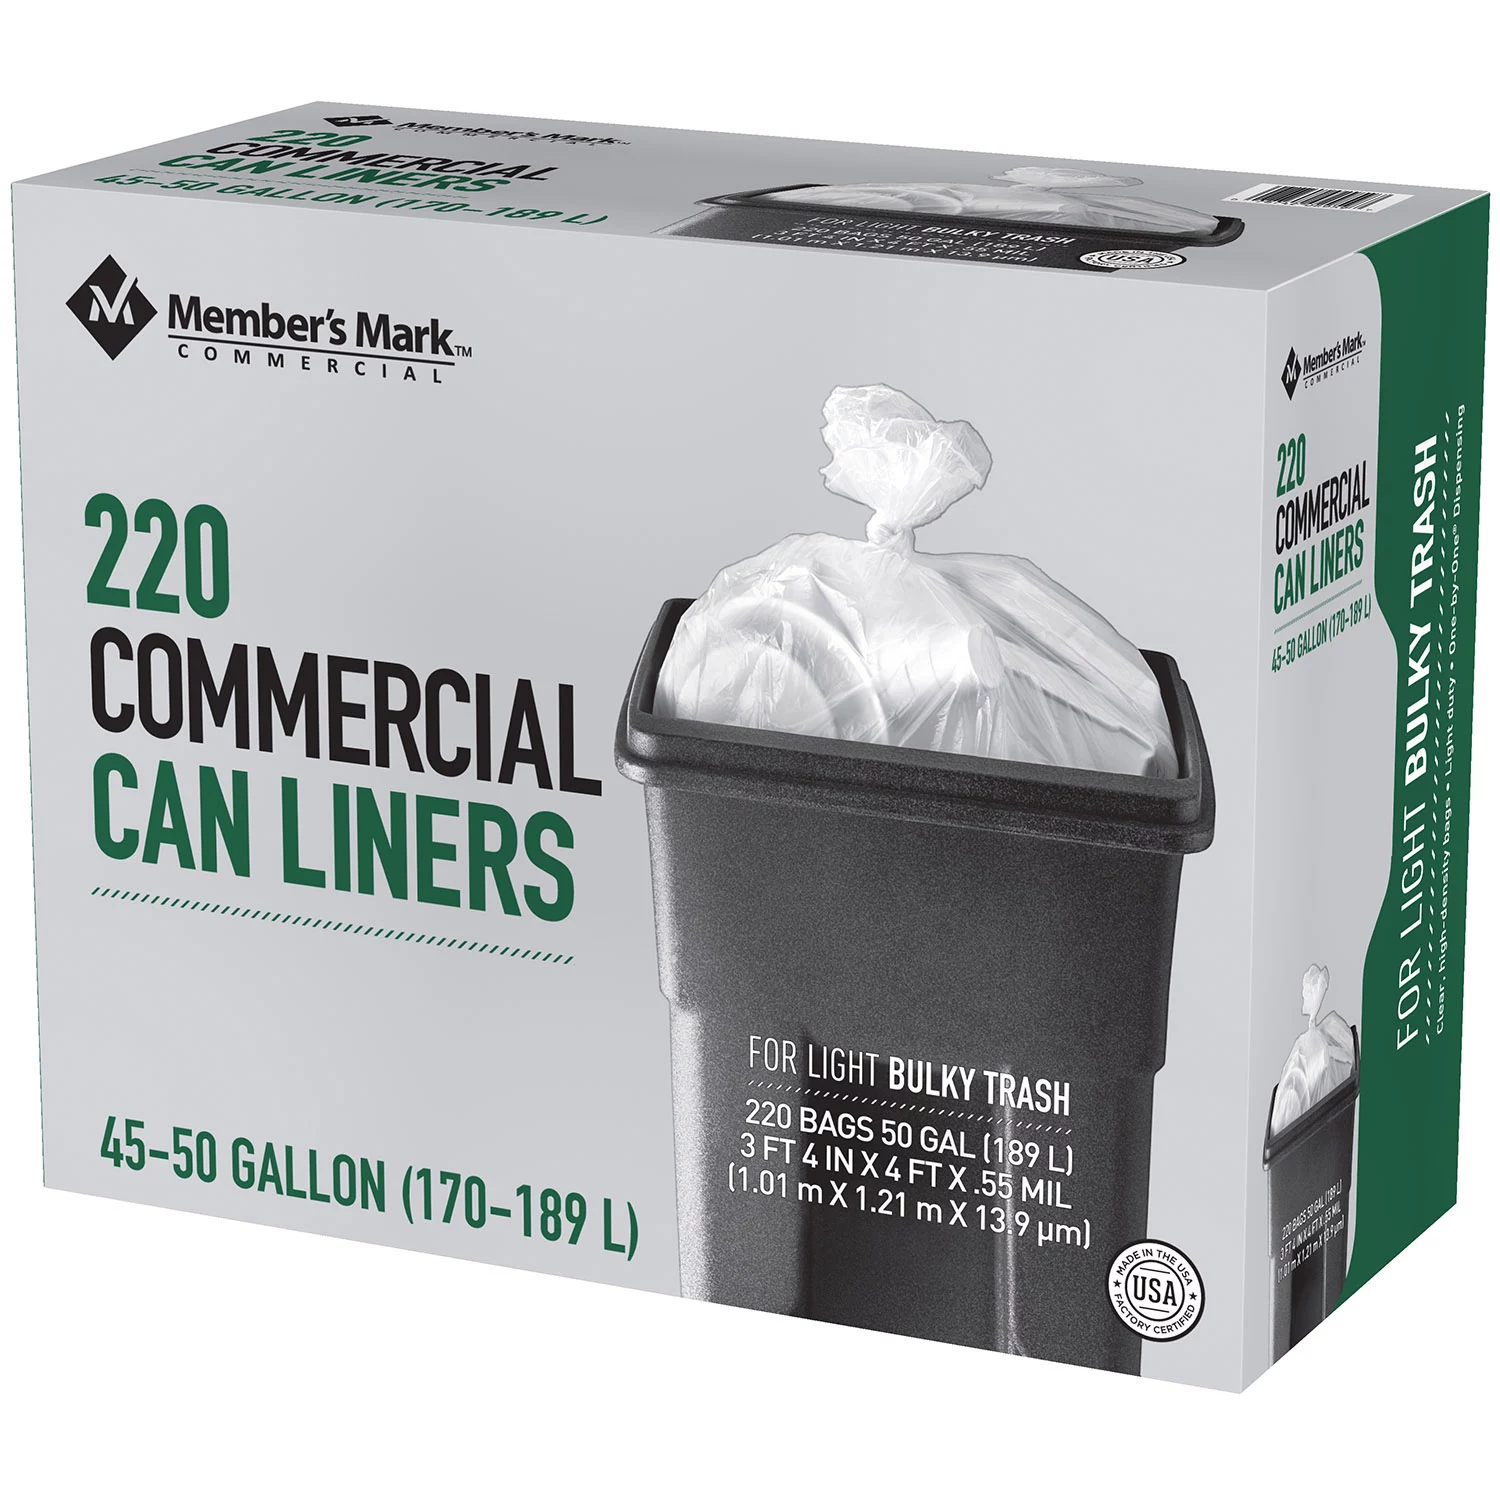 Member's Mark 33 Gallon Commercial Trash Bags (16 rolls of 20 ct., total  320 ct.)